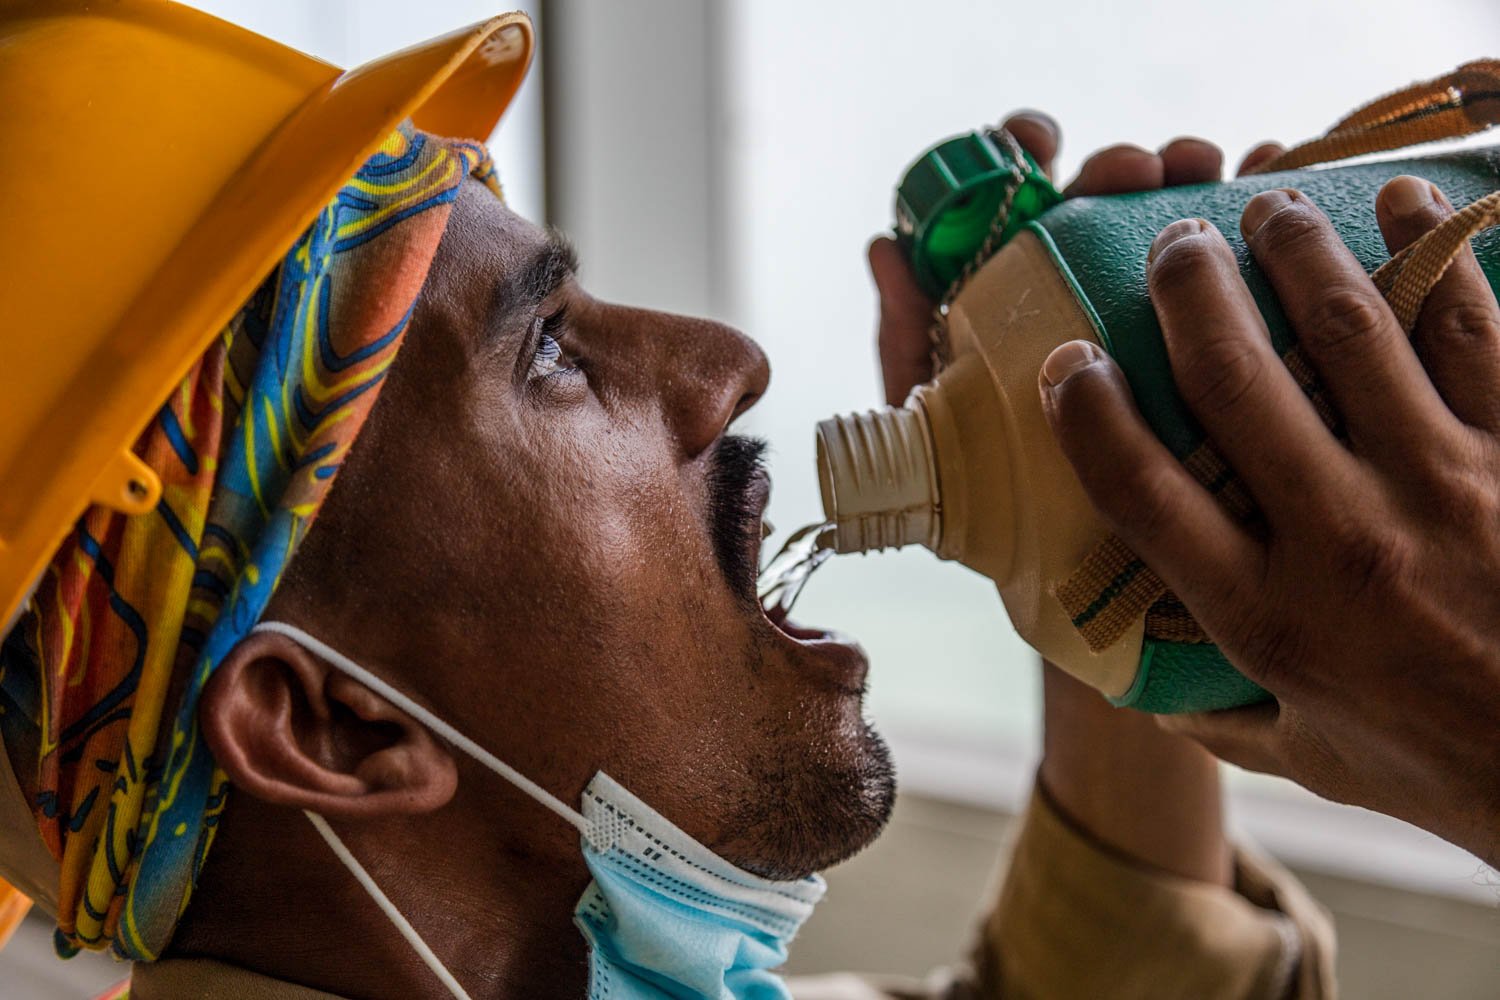  A worker drinks water at a construction site in Doha, Qatar on August 17, 2022. 